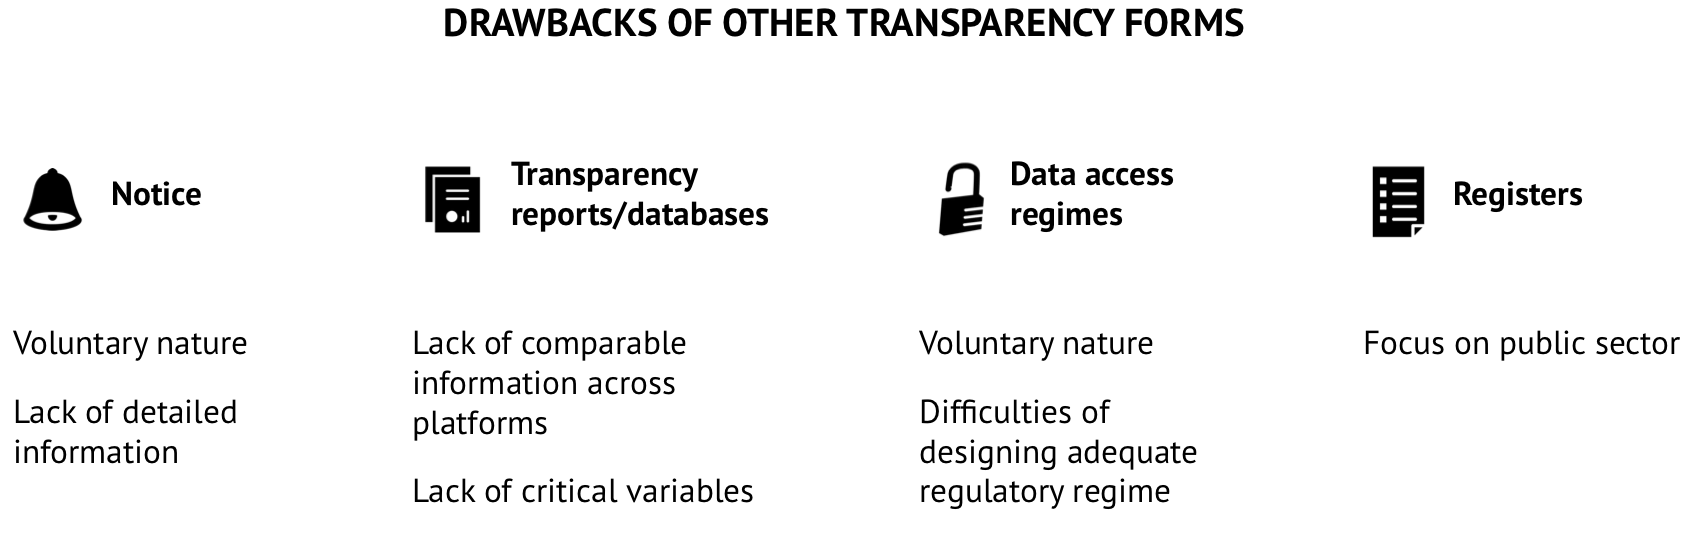 An overview visualising the drawbacks of other transparency forms.